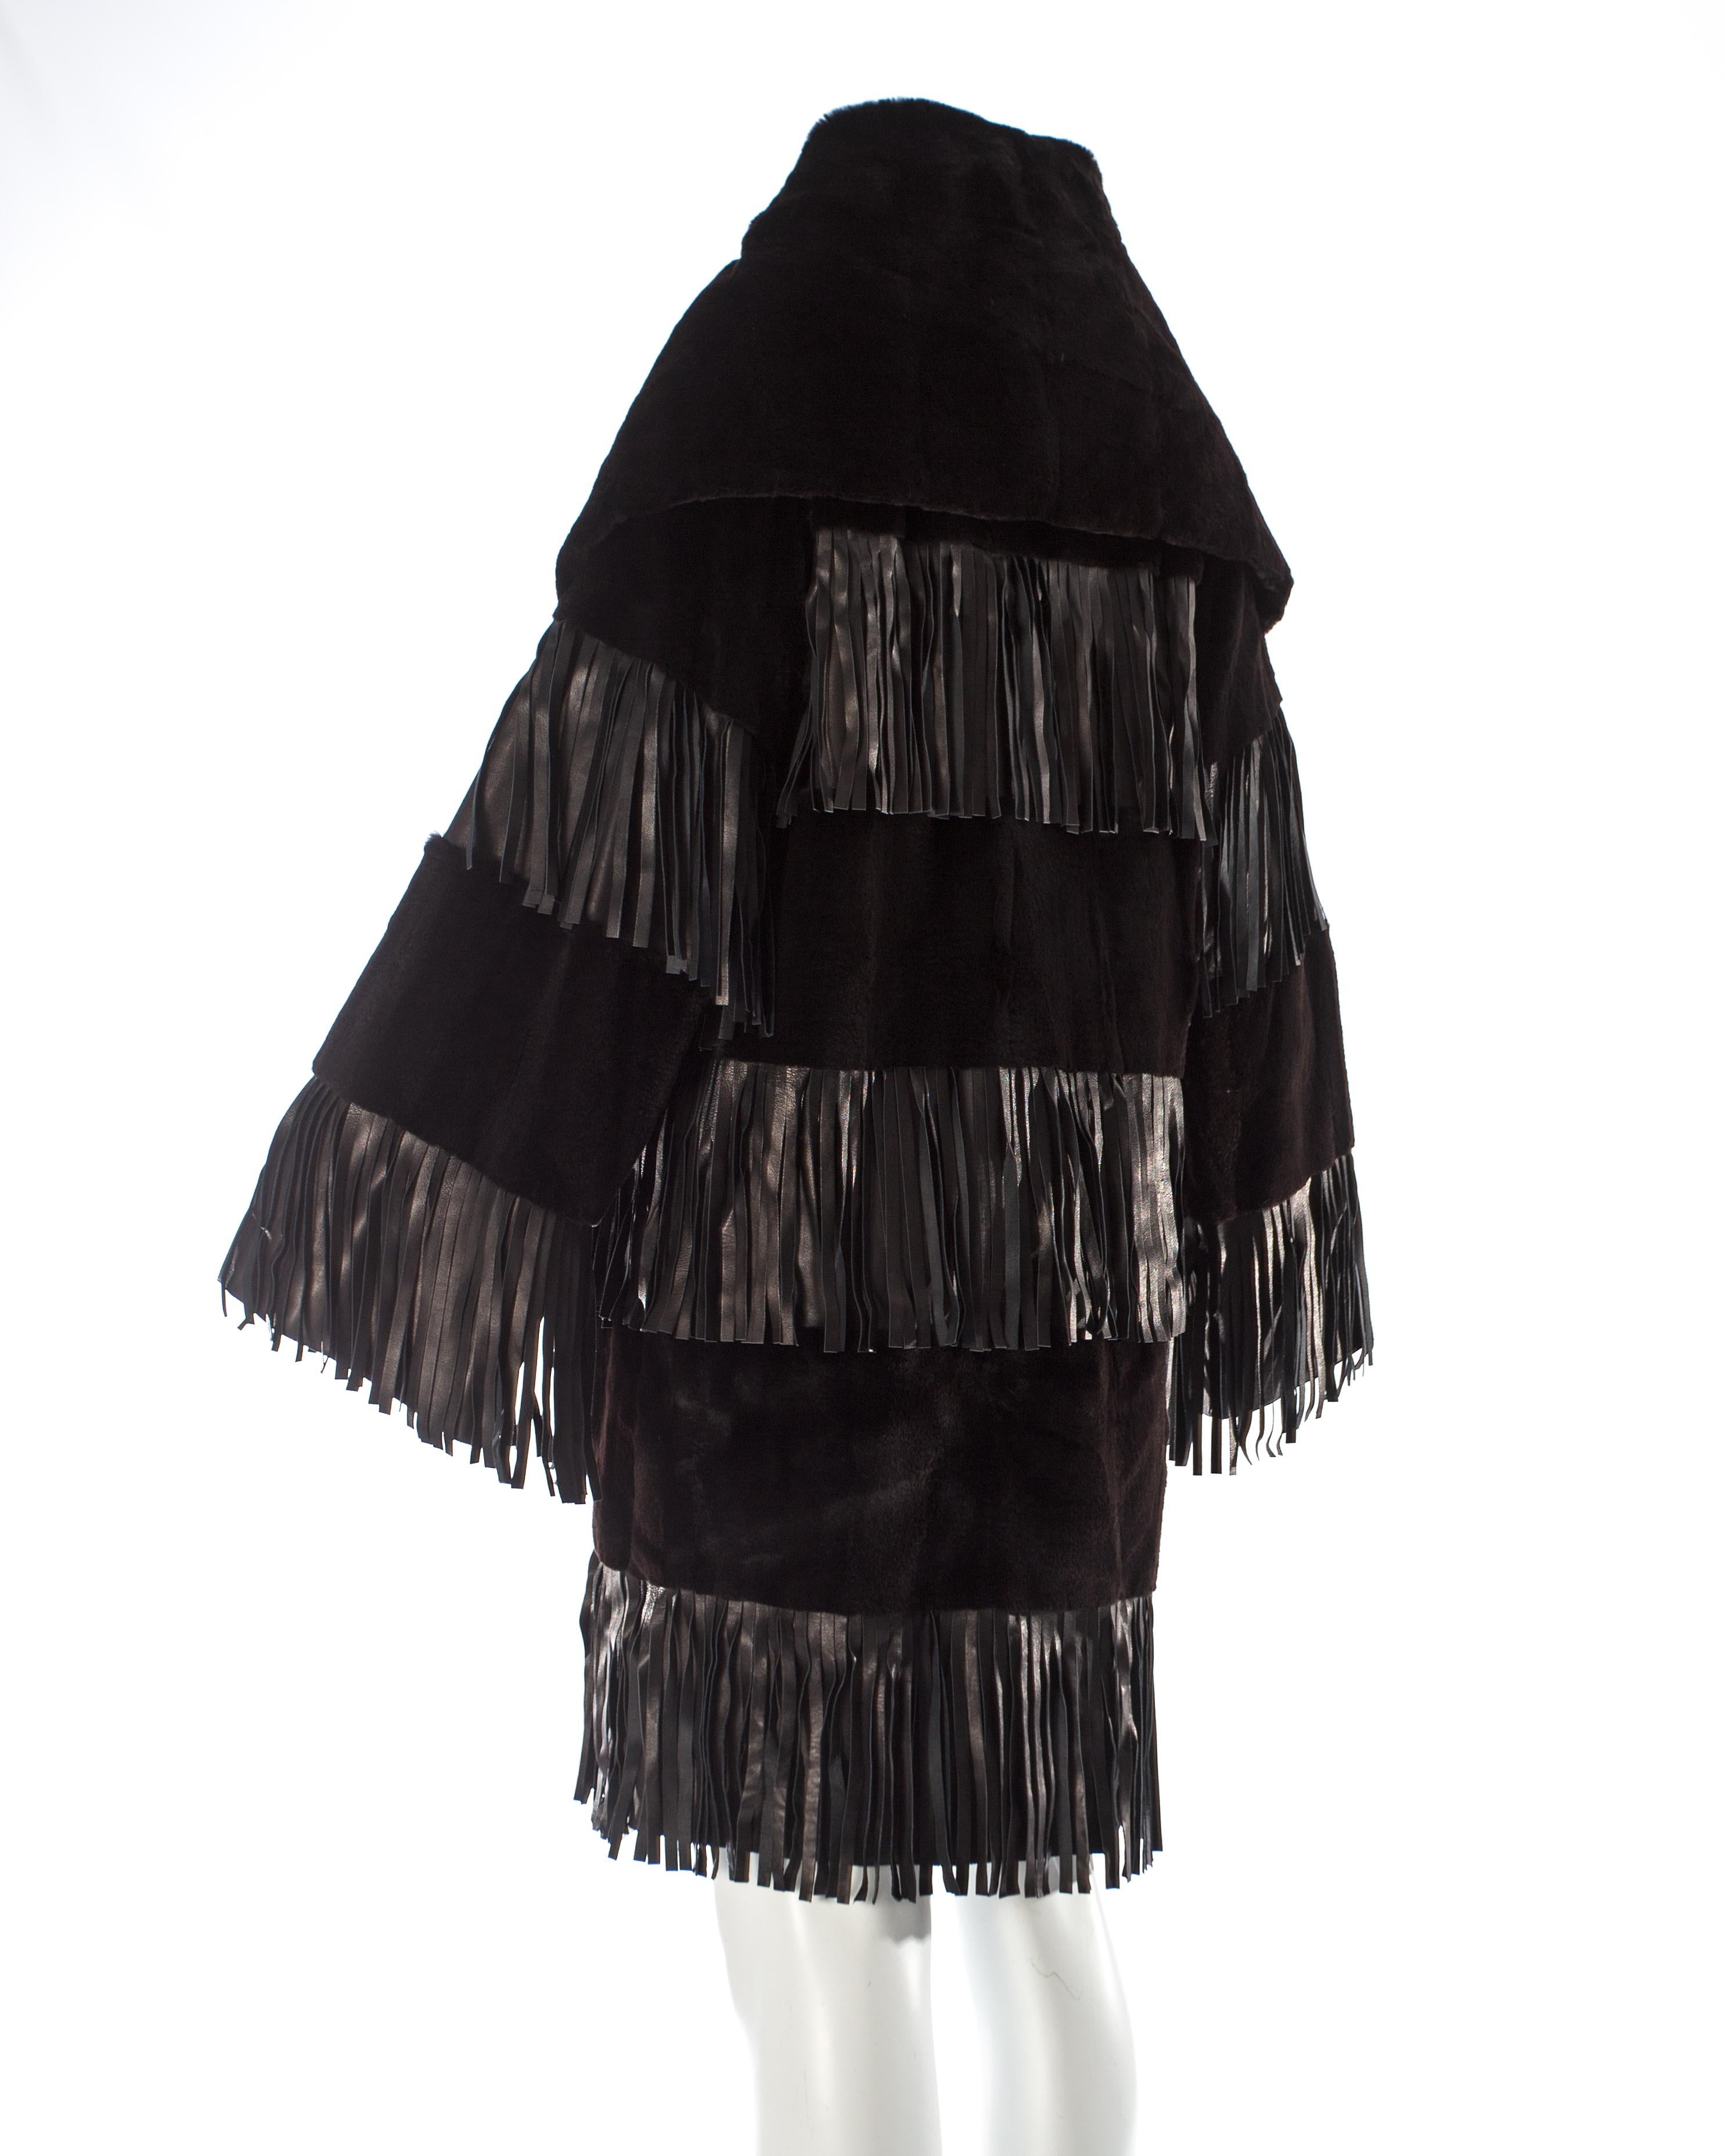 Black Dolce & Gabbana black sheared weasel fur coat with leather fringing, A / W 2003 For Sale